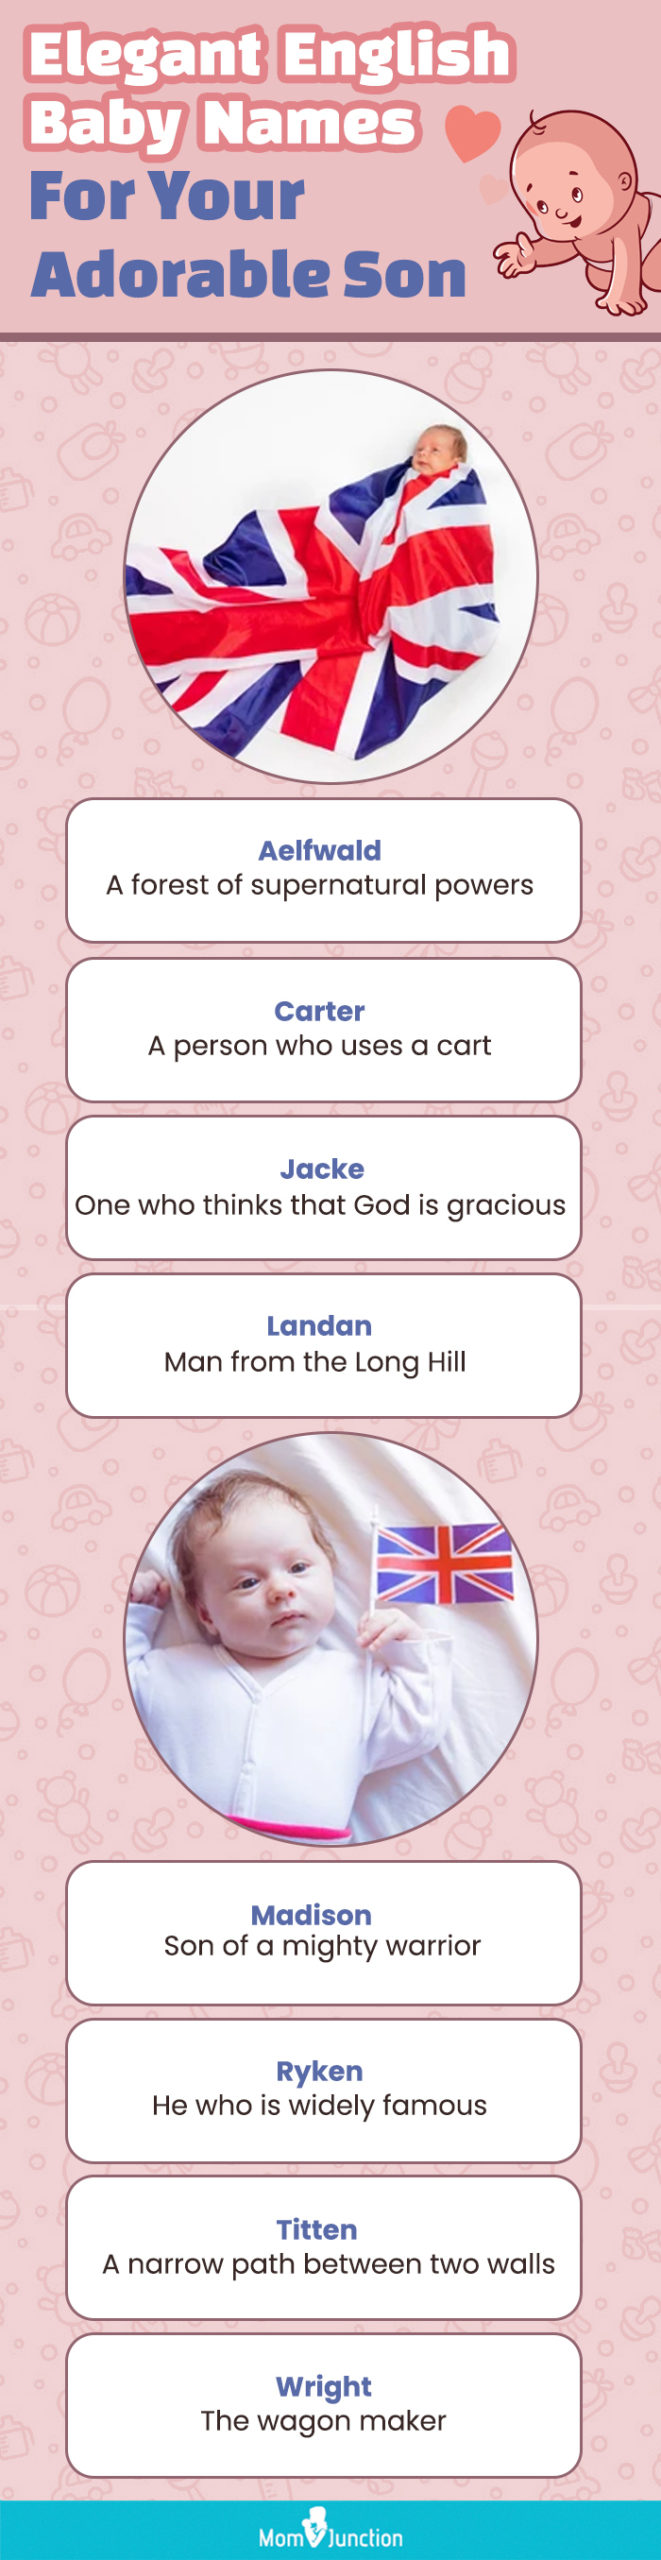 elegant english baby names for your adorable son (infographic)